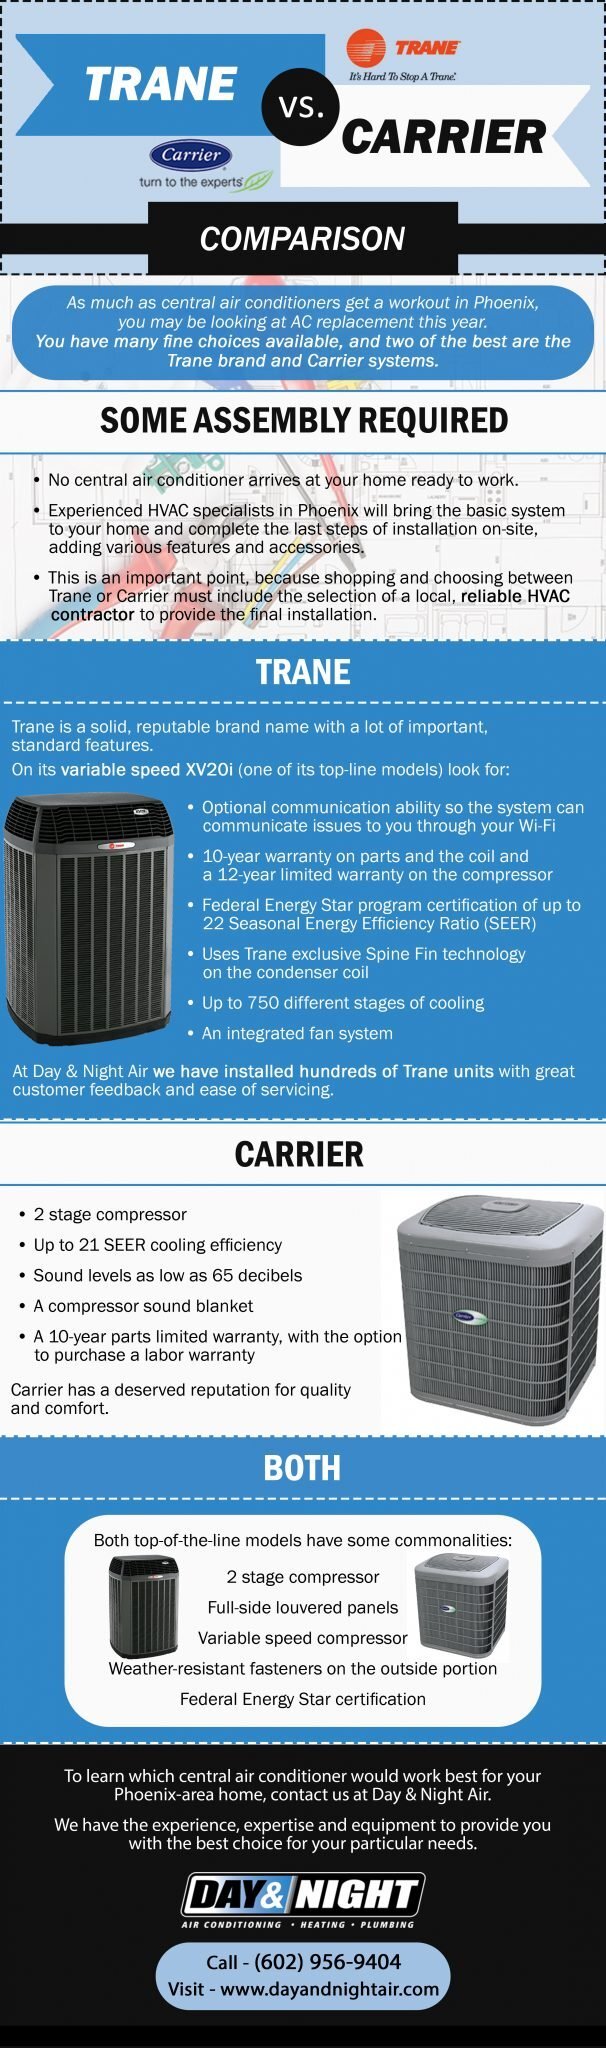 carrier vs payne air conditioners